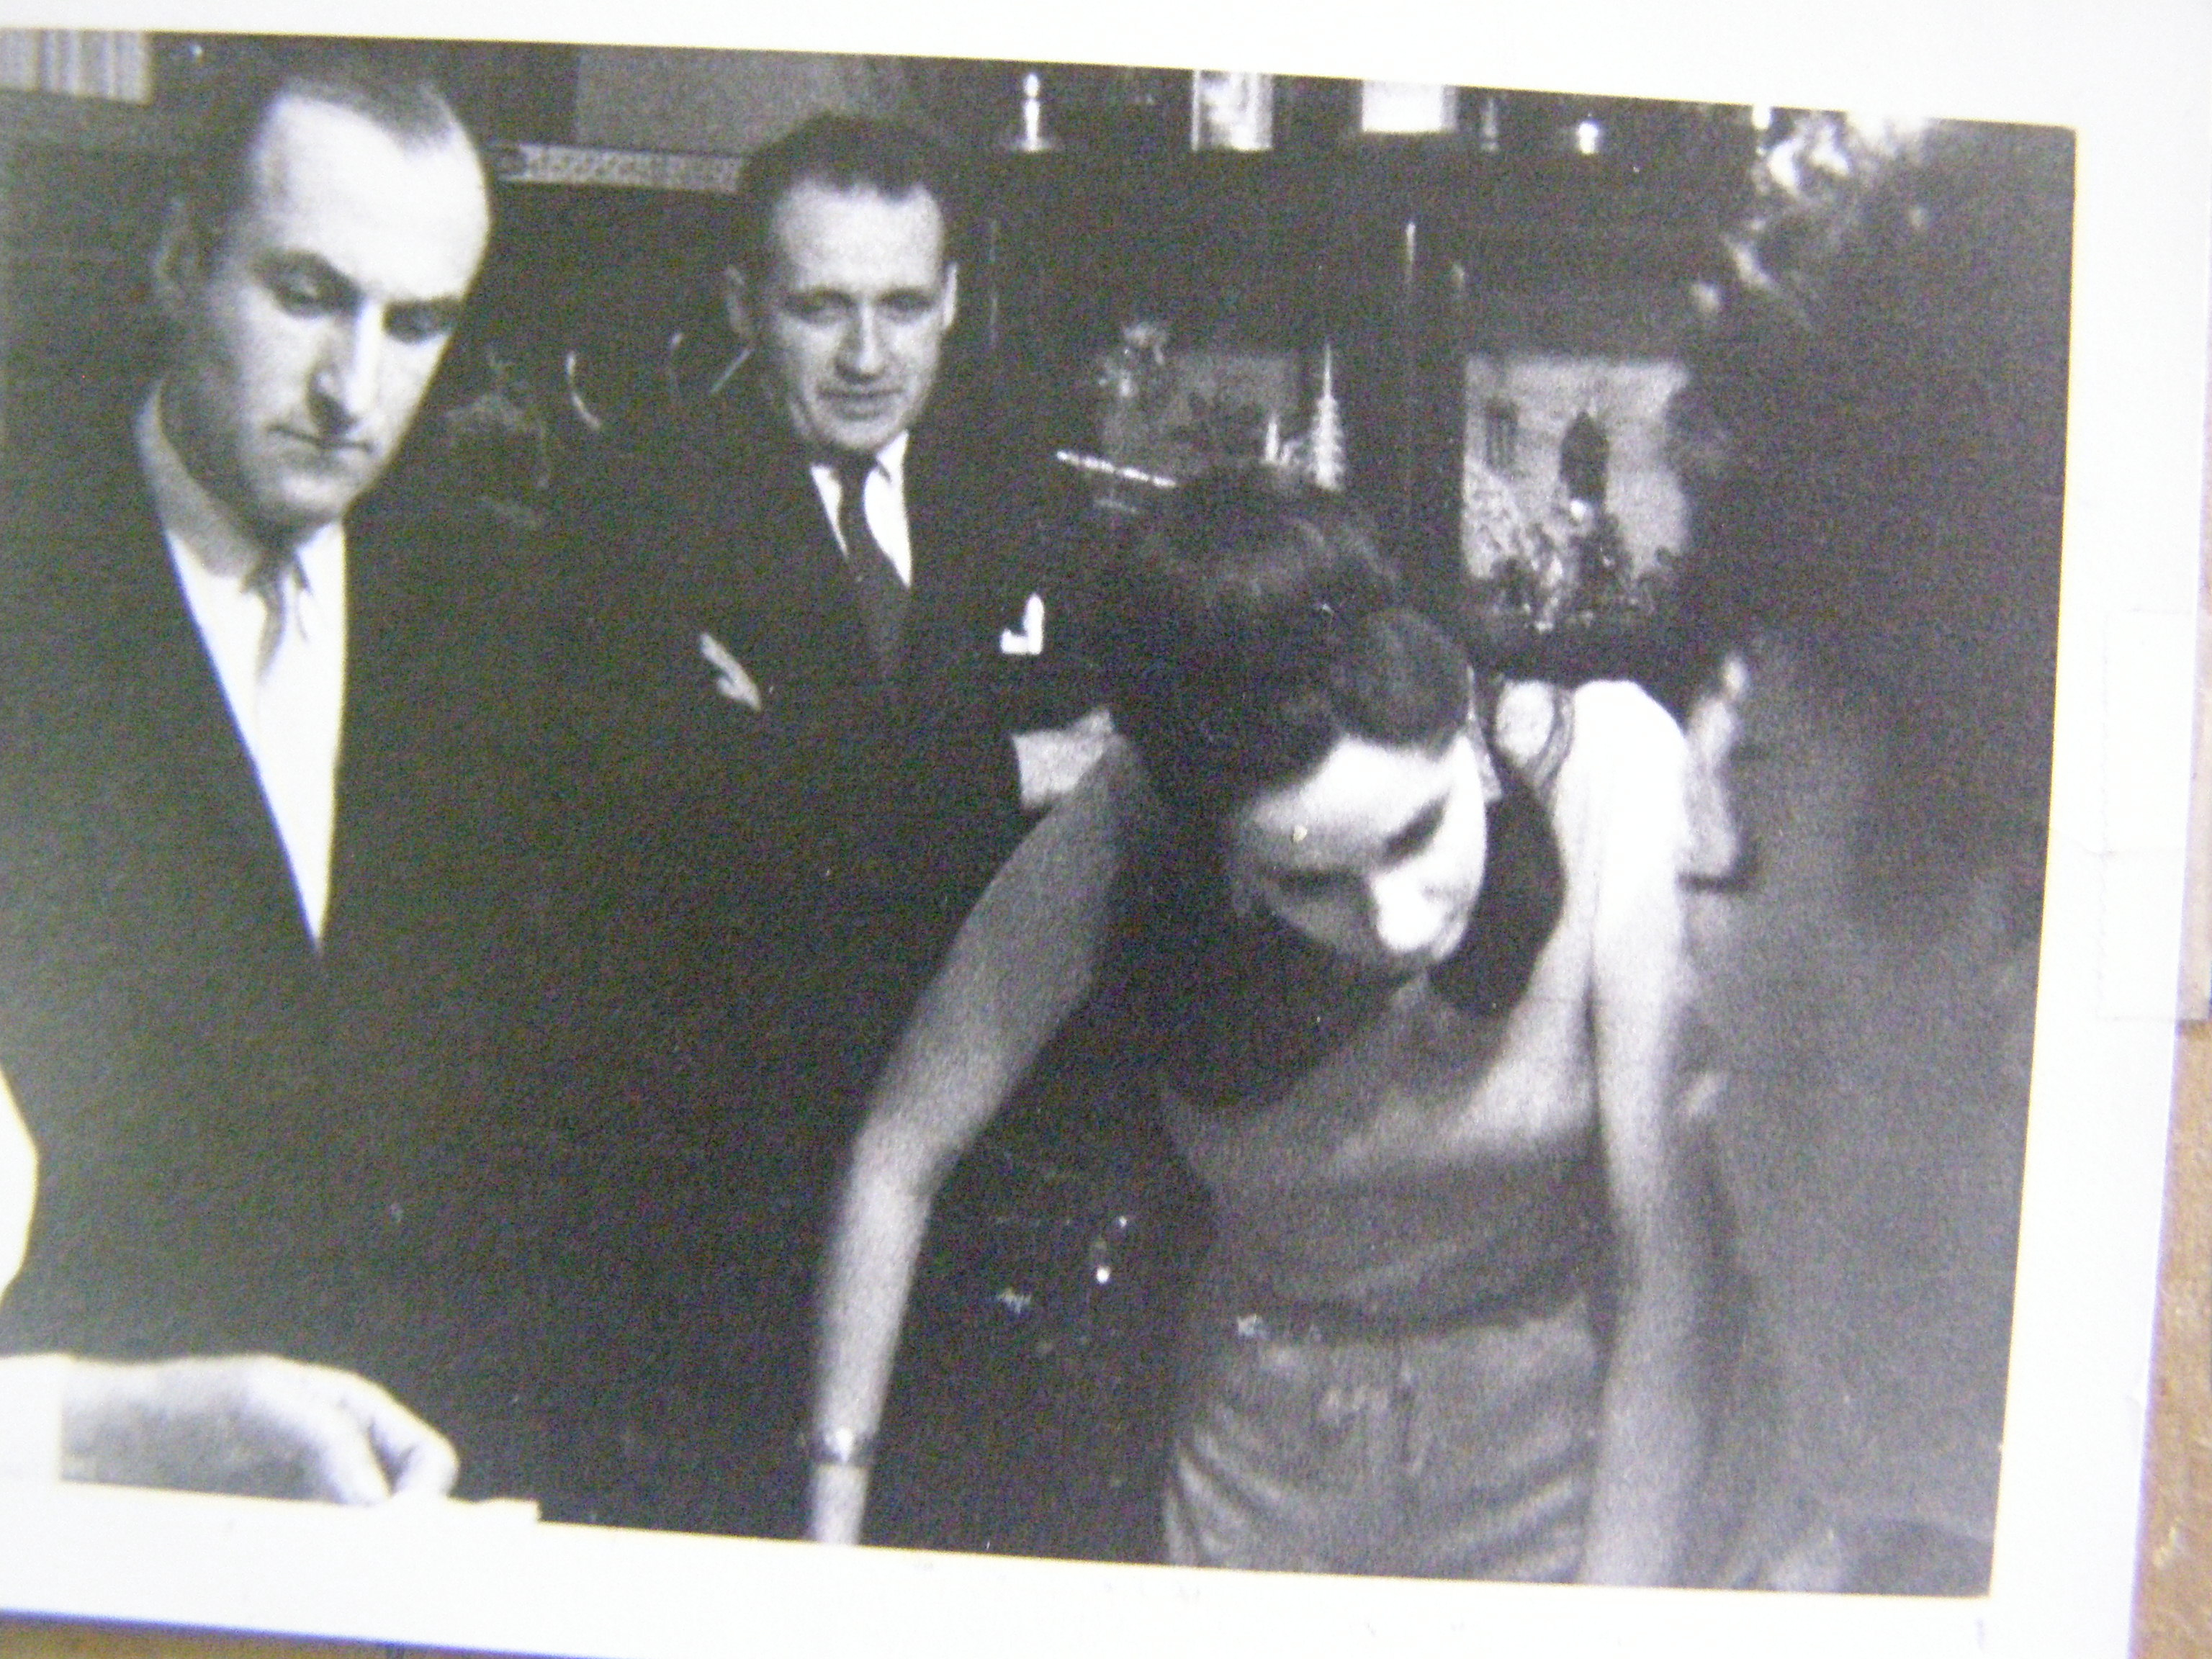 Dr. Hans Holzer with wife Countess Catherine Buxhoeveden on an investigation circa 1950s.